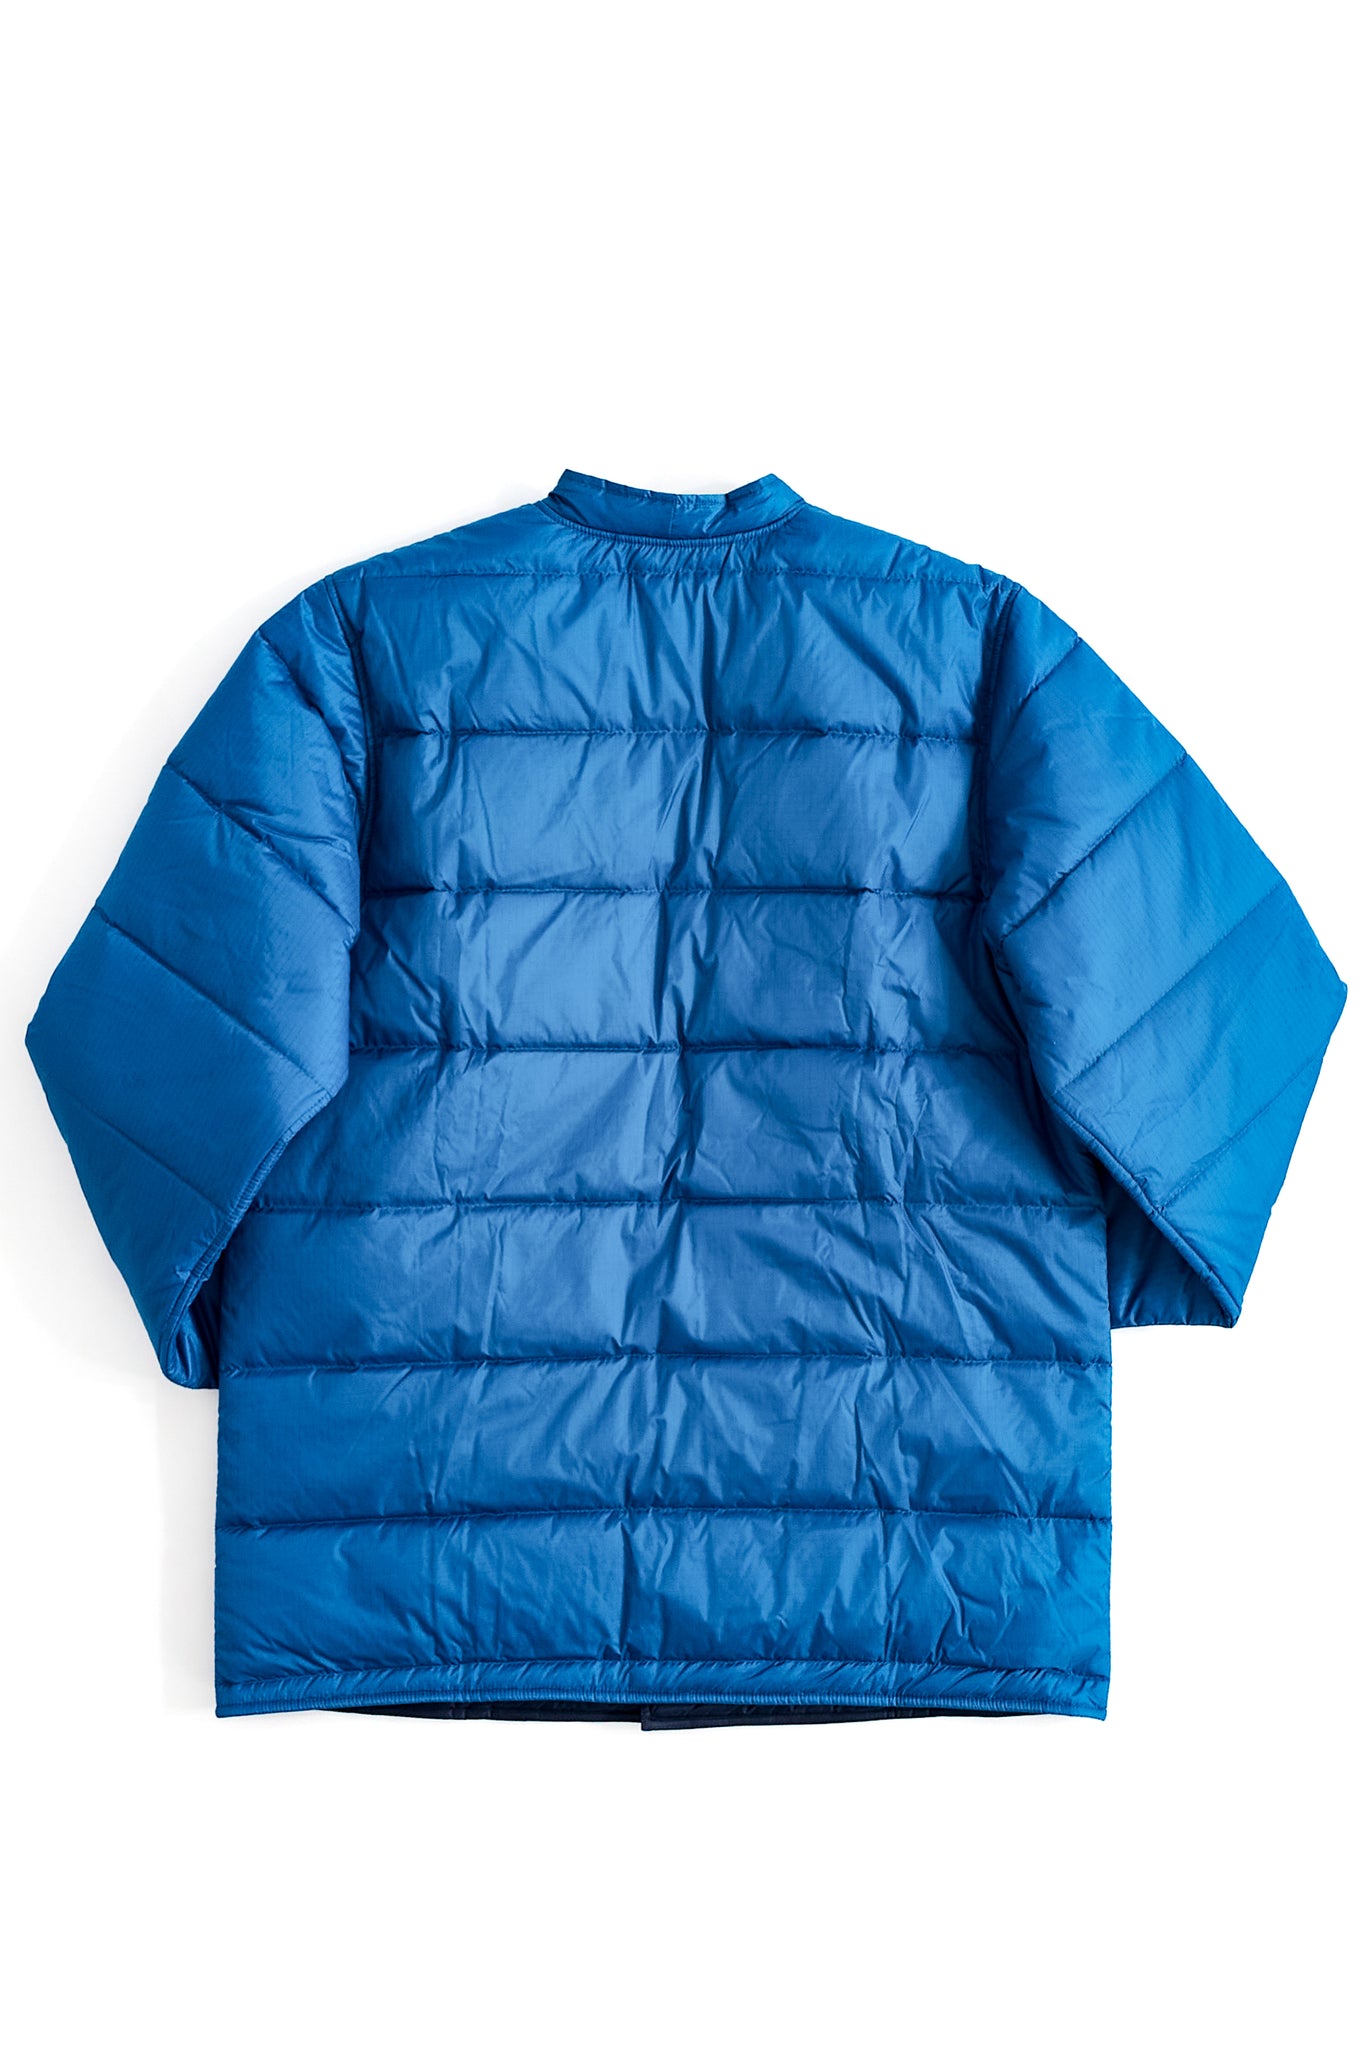 OLIVER REVERSIBLE QUILTED SAHASIKA - NAVY / TURQUOISE NYLON RIPSTOP